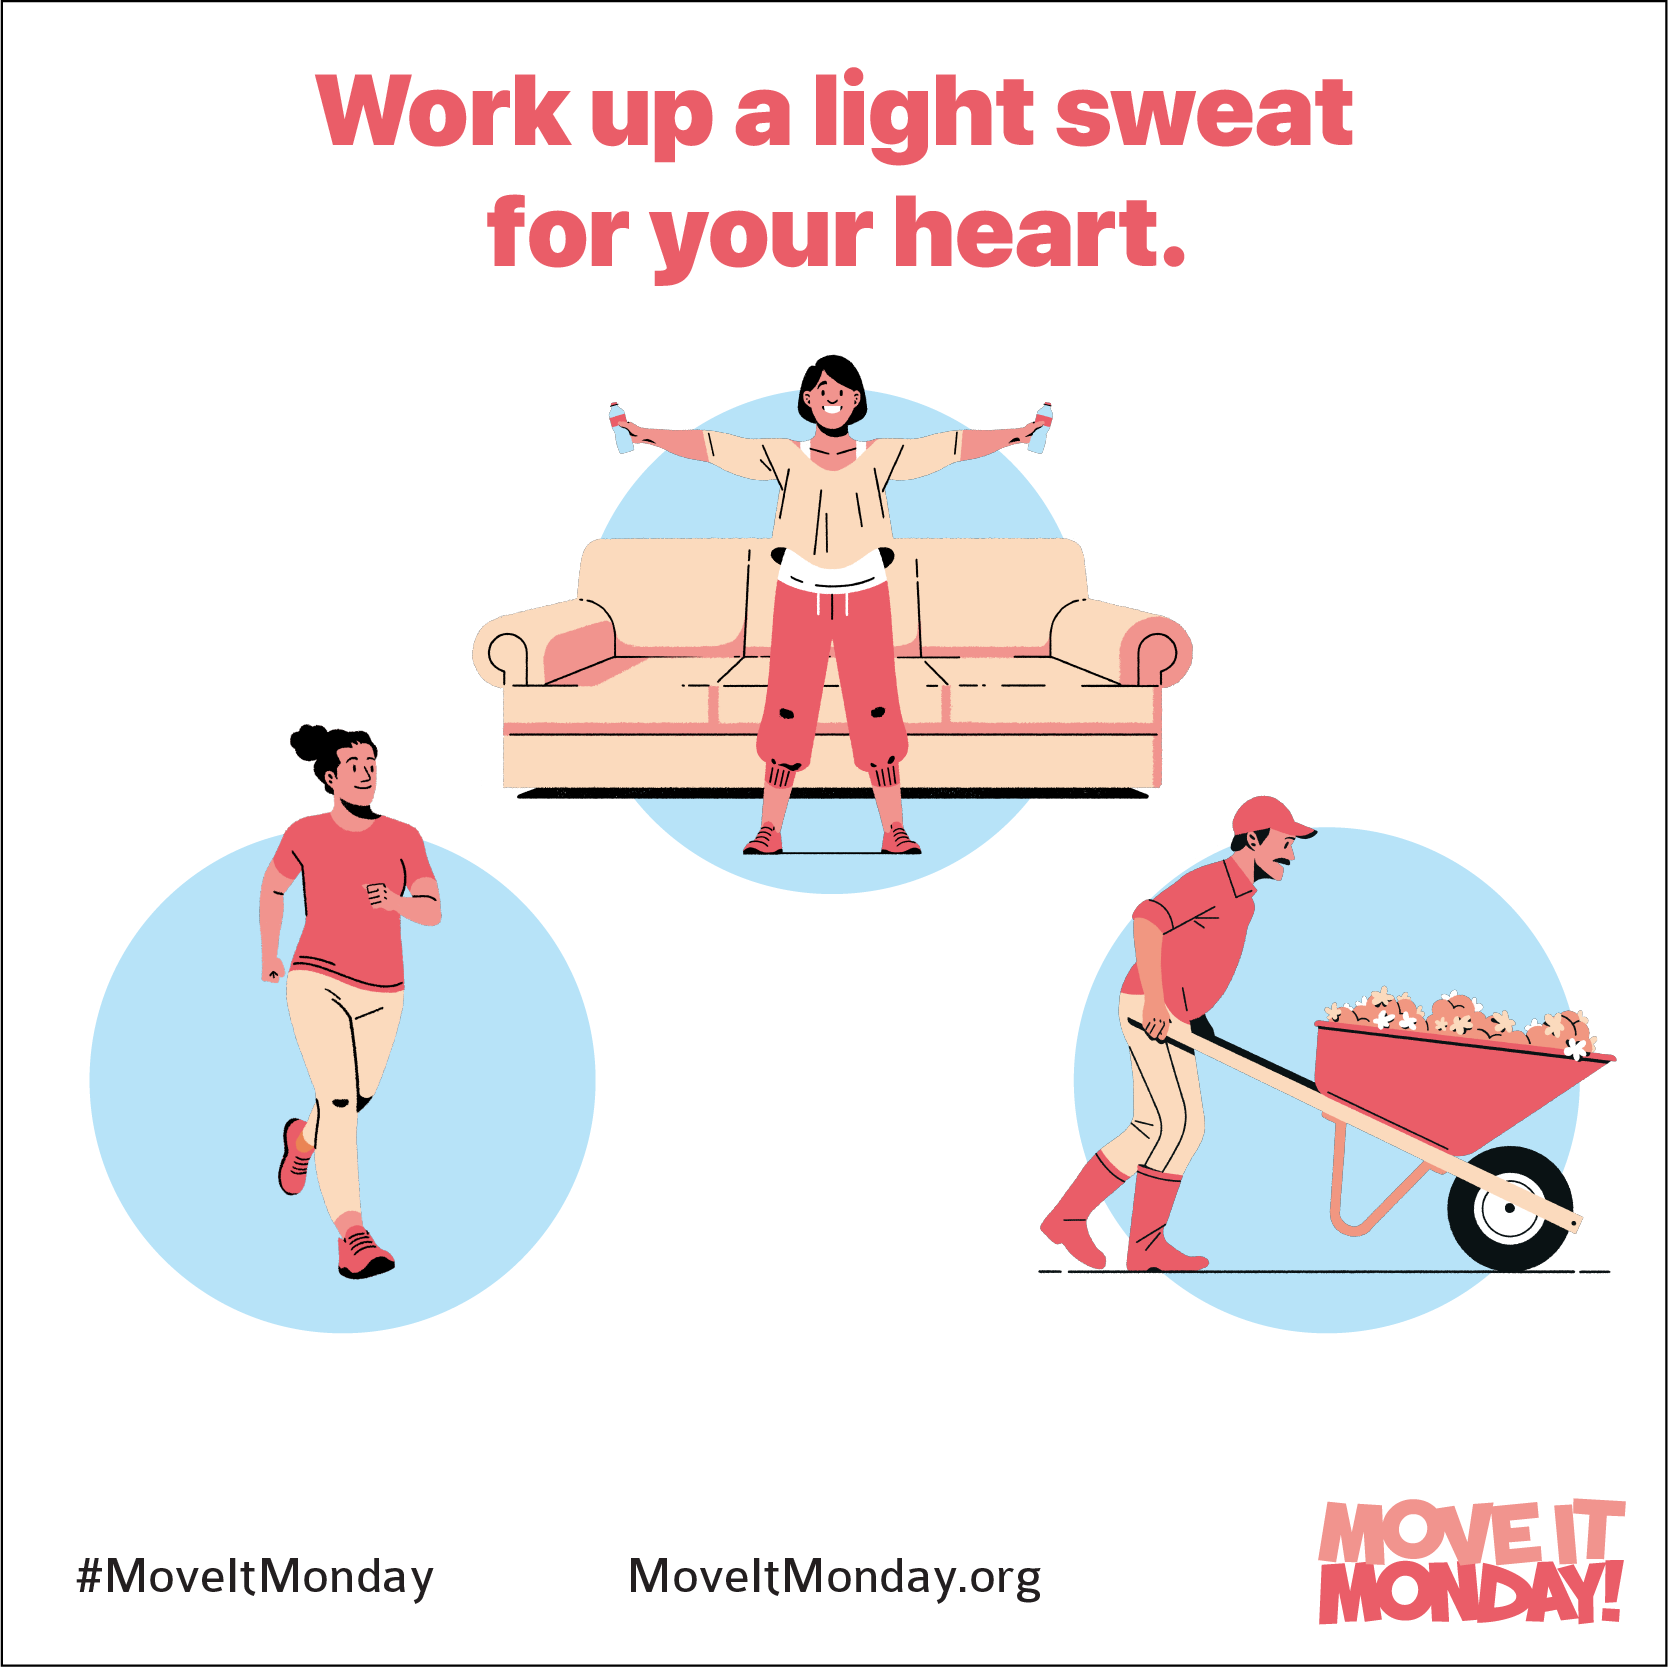 Work up a light sweat for your heart.